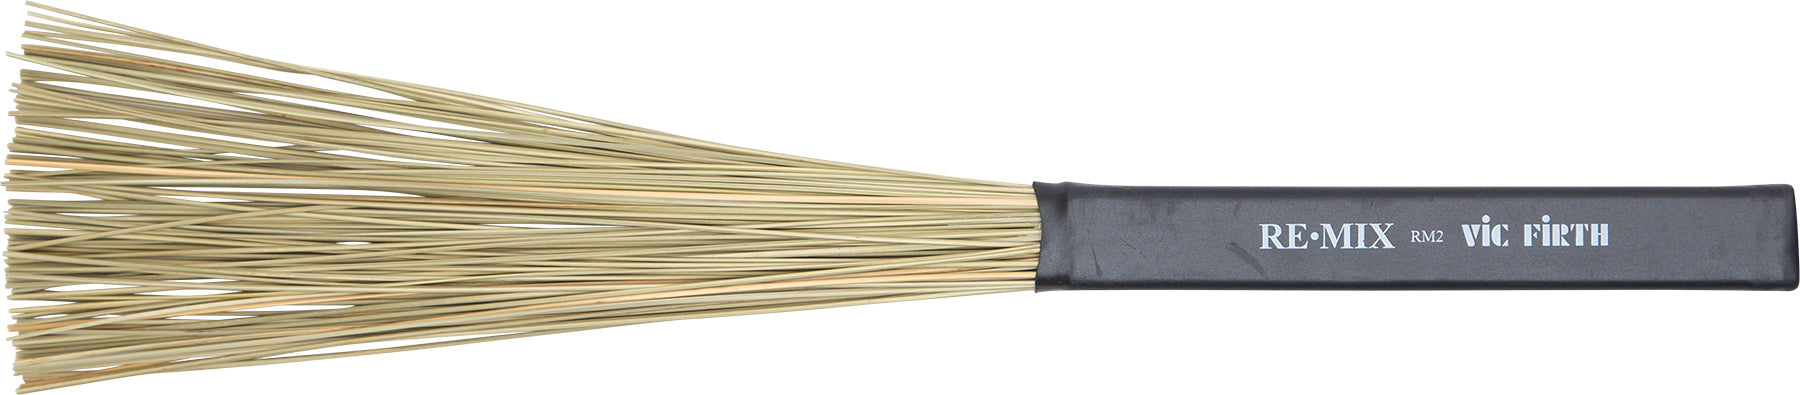 Vic Firth Brushes - African Grass